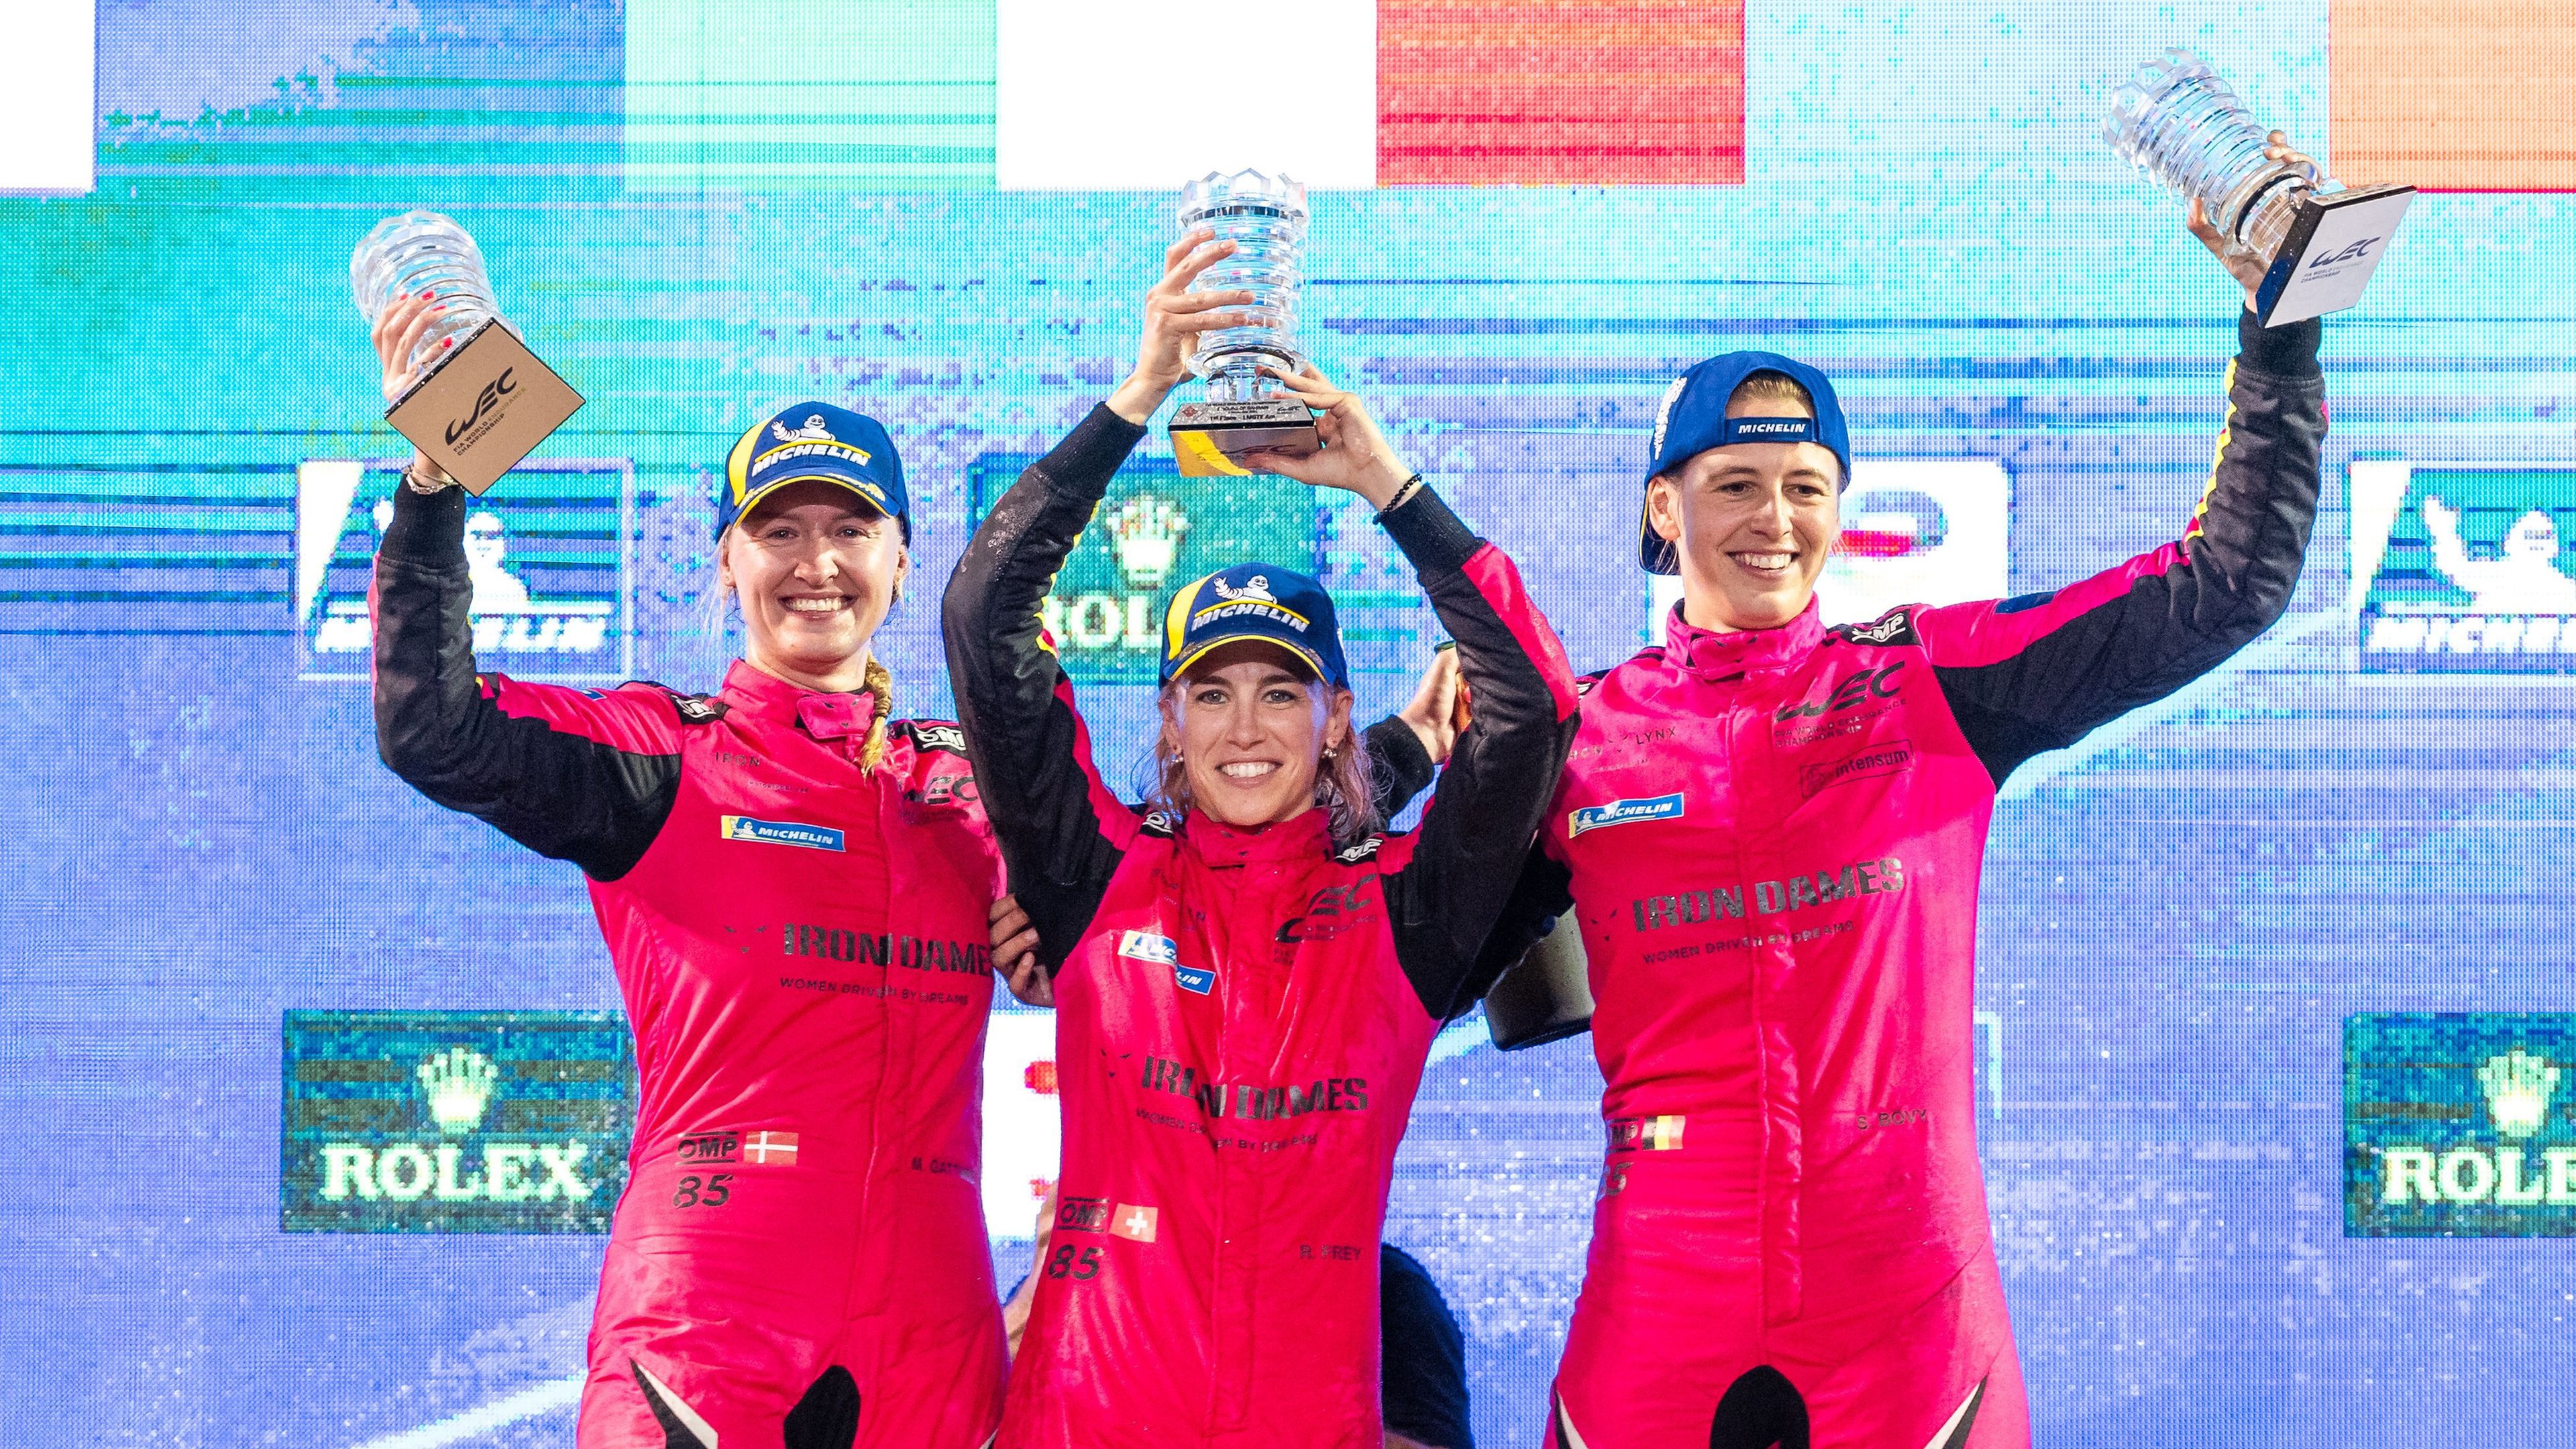 Historic race victory for all-female crew 'vindication' girls can foot it with the boys